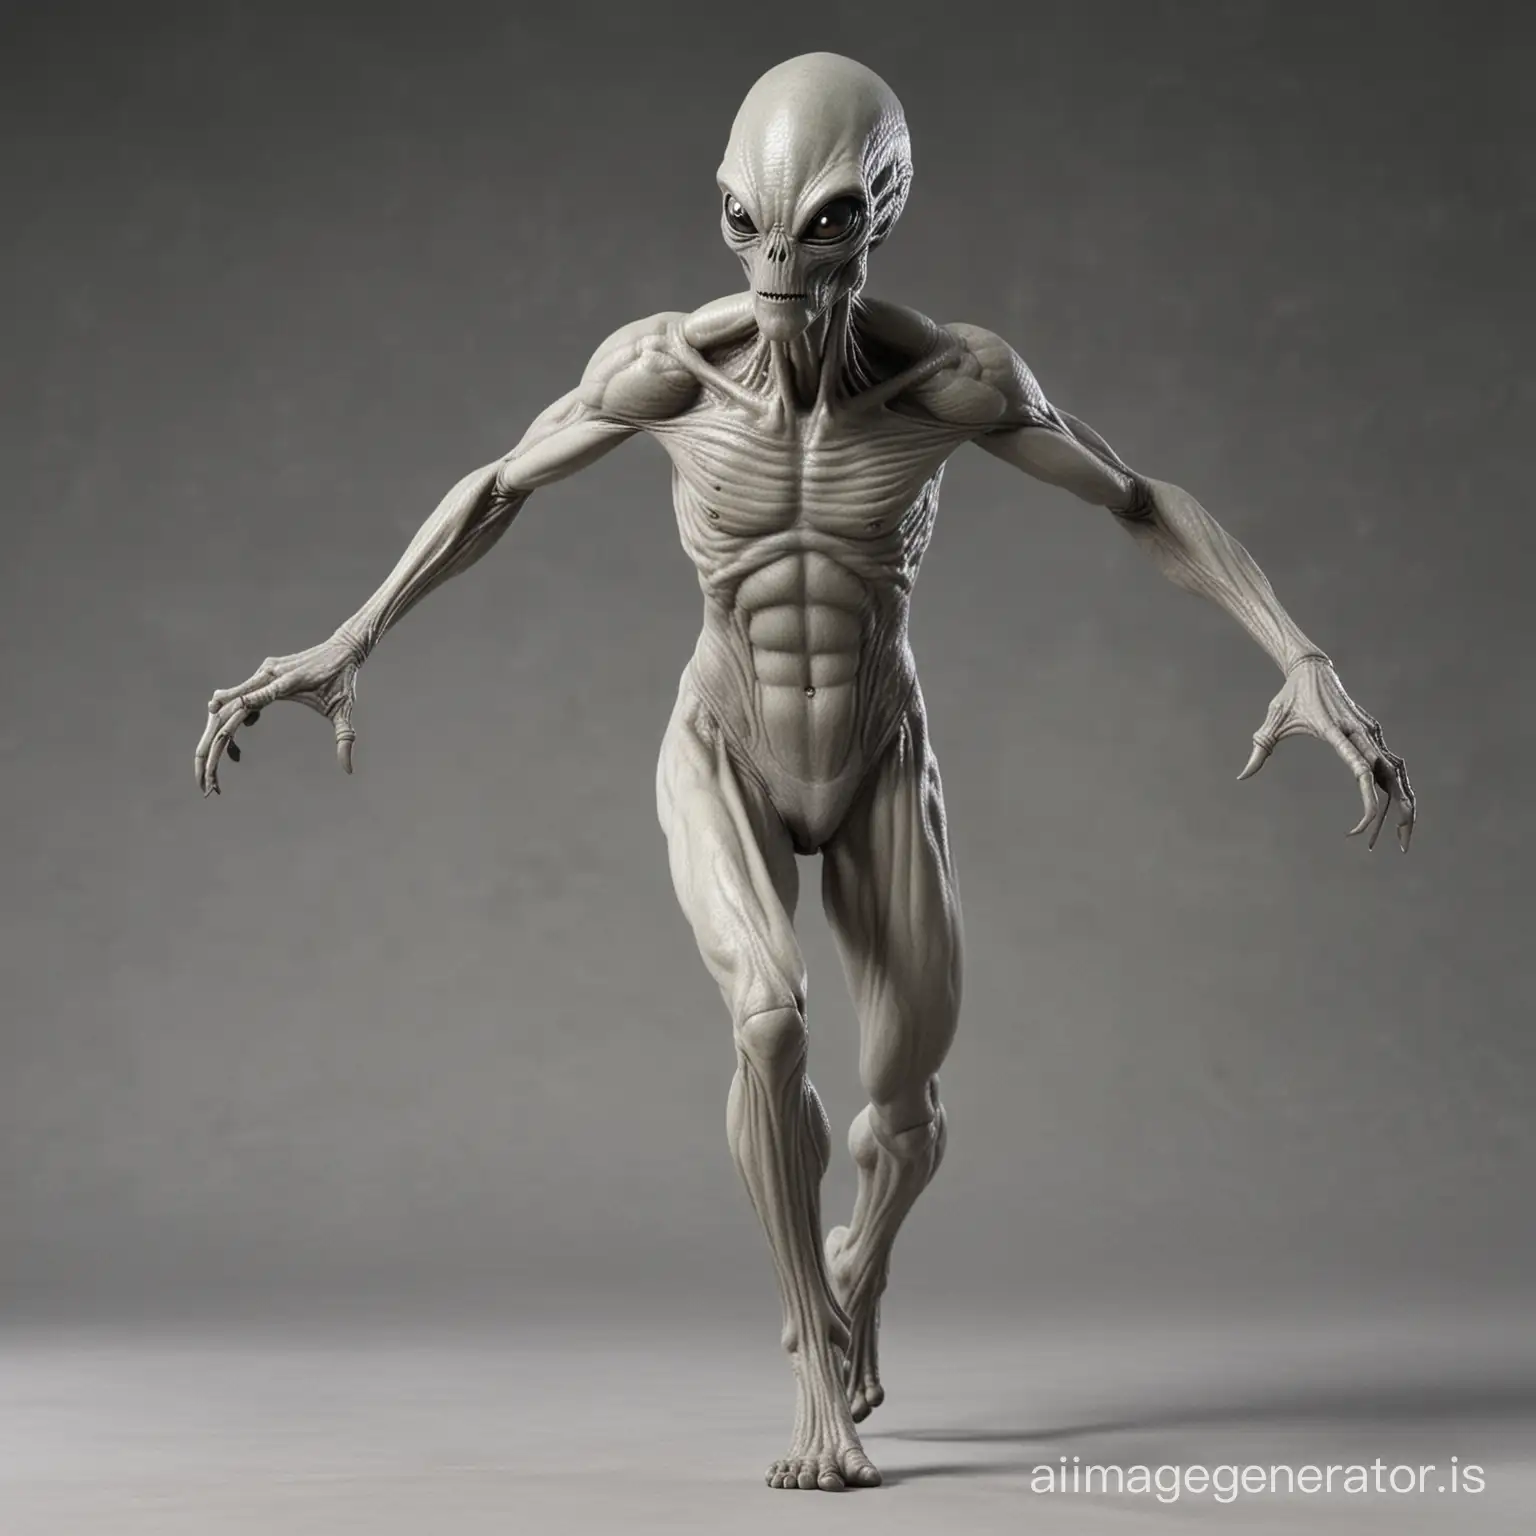 Grey-Alien-Running-to-the-Right-Extraterrestrial-Movement-in-Motion